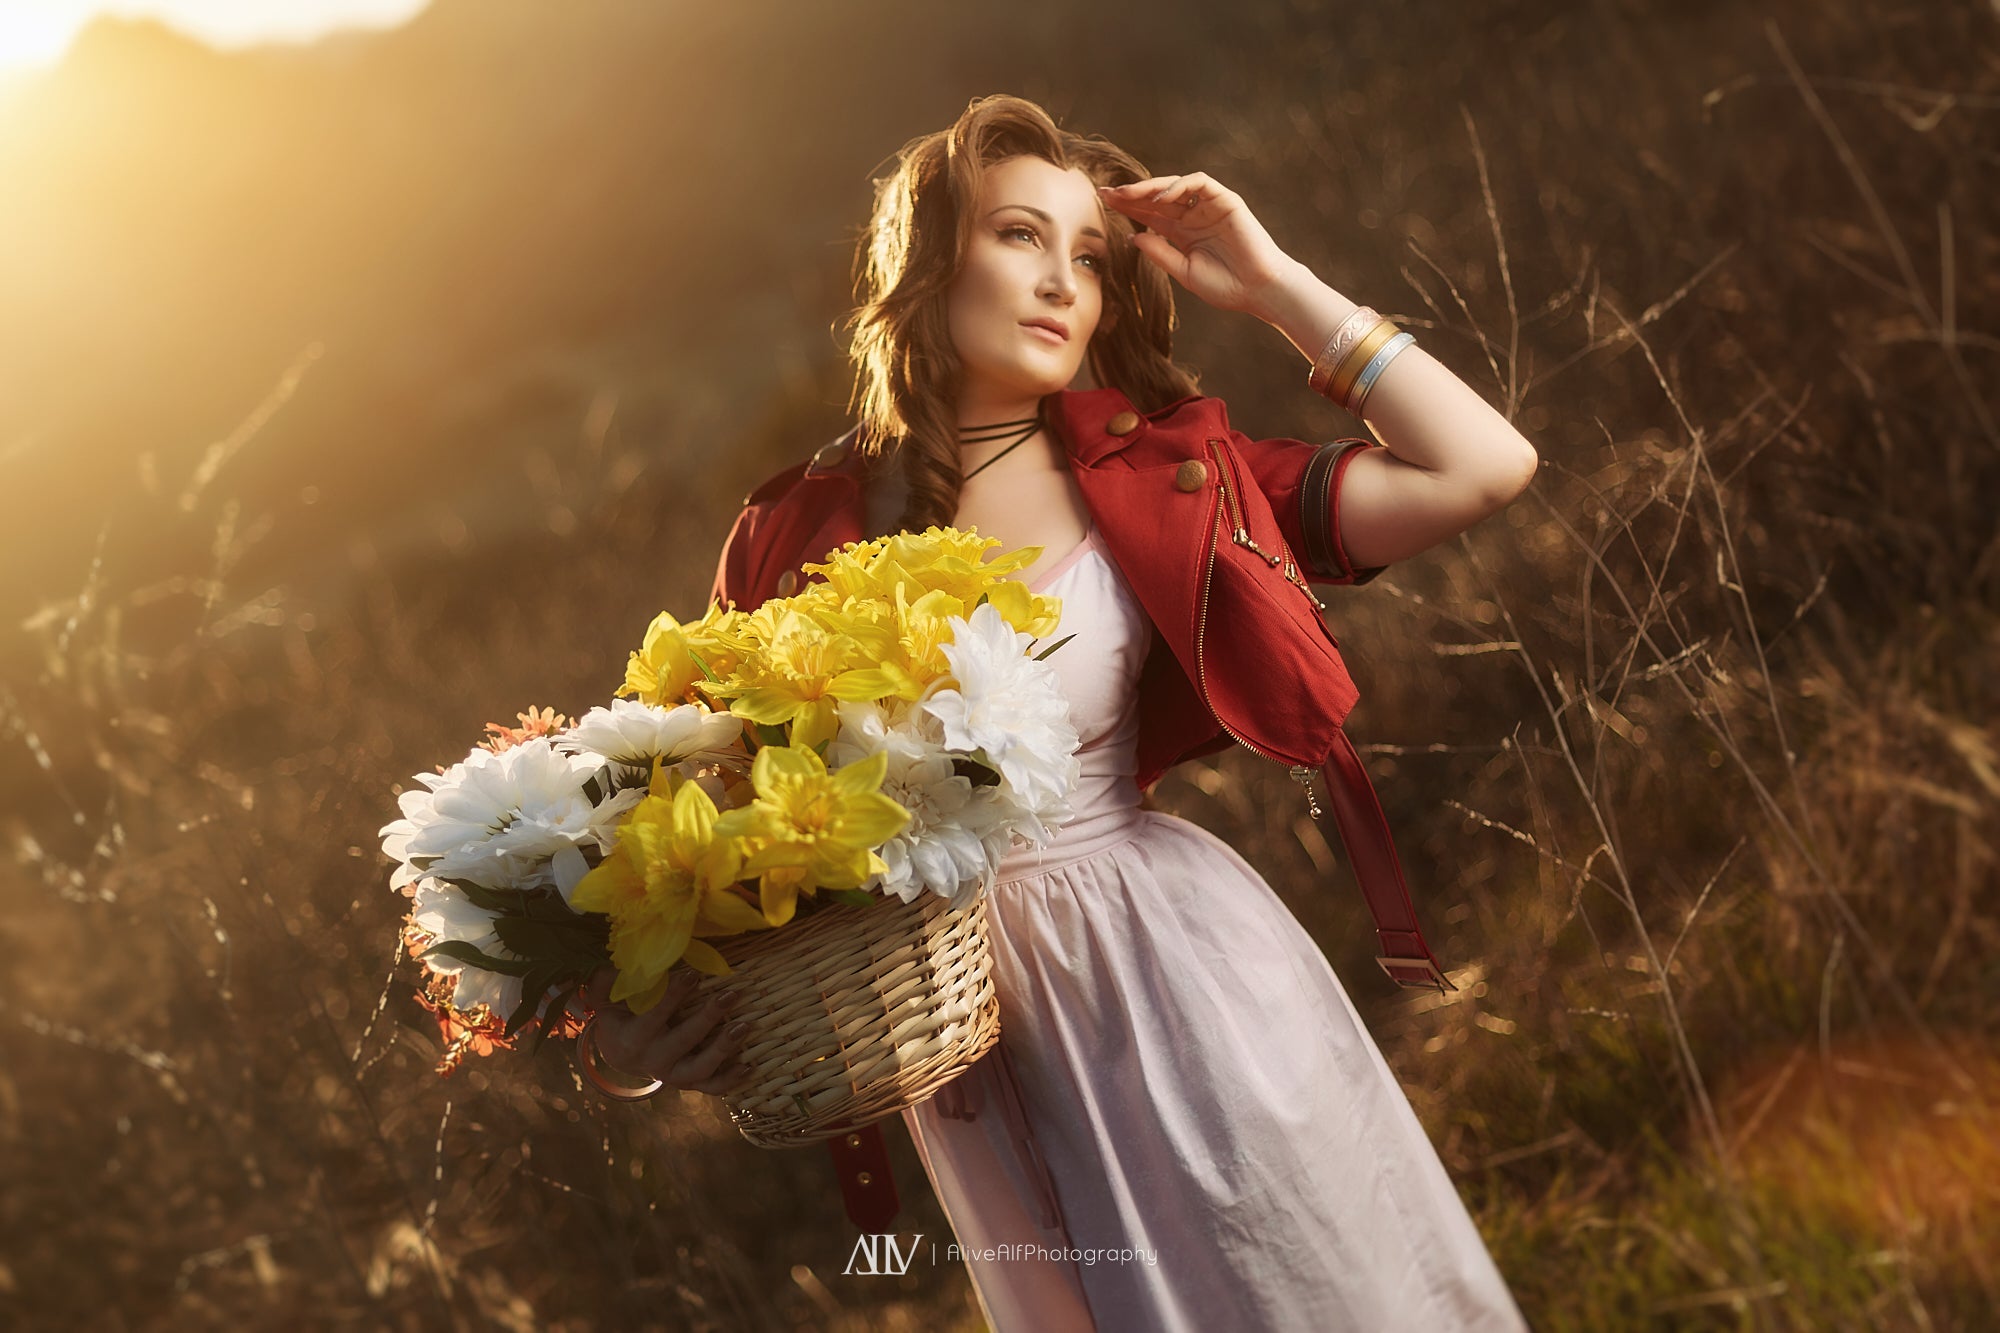 Holly T Wolf Aerith Gainsborough Cosplay from Final Fantasy VII